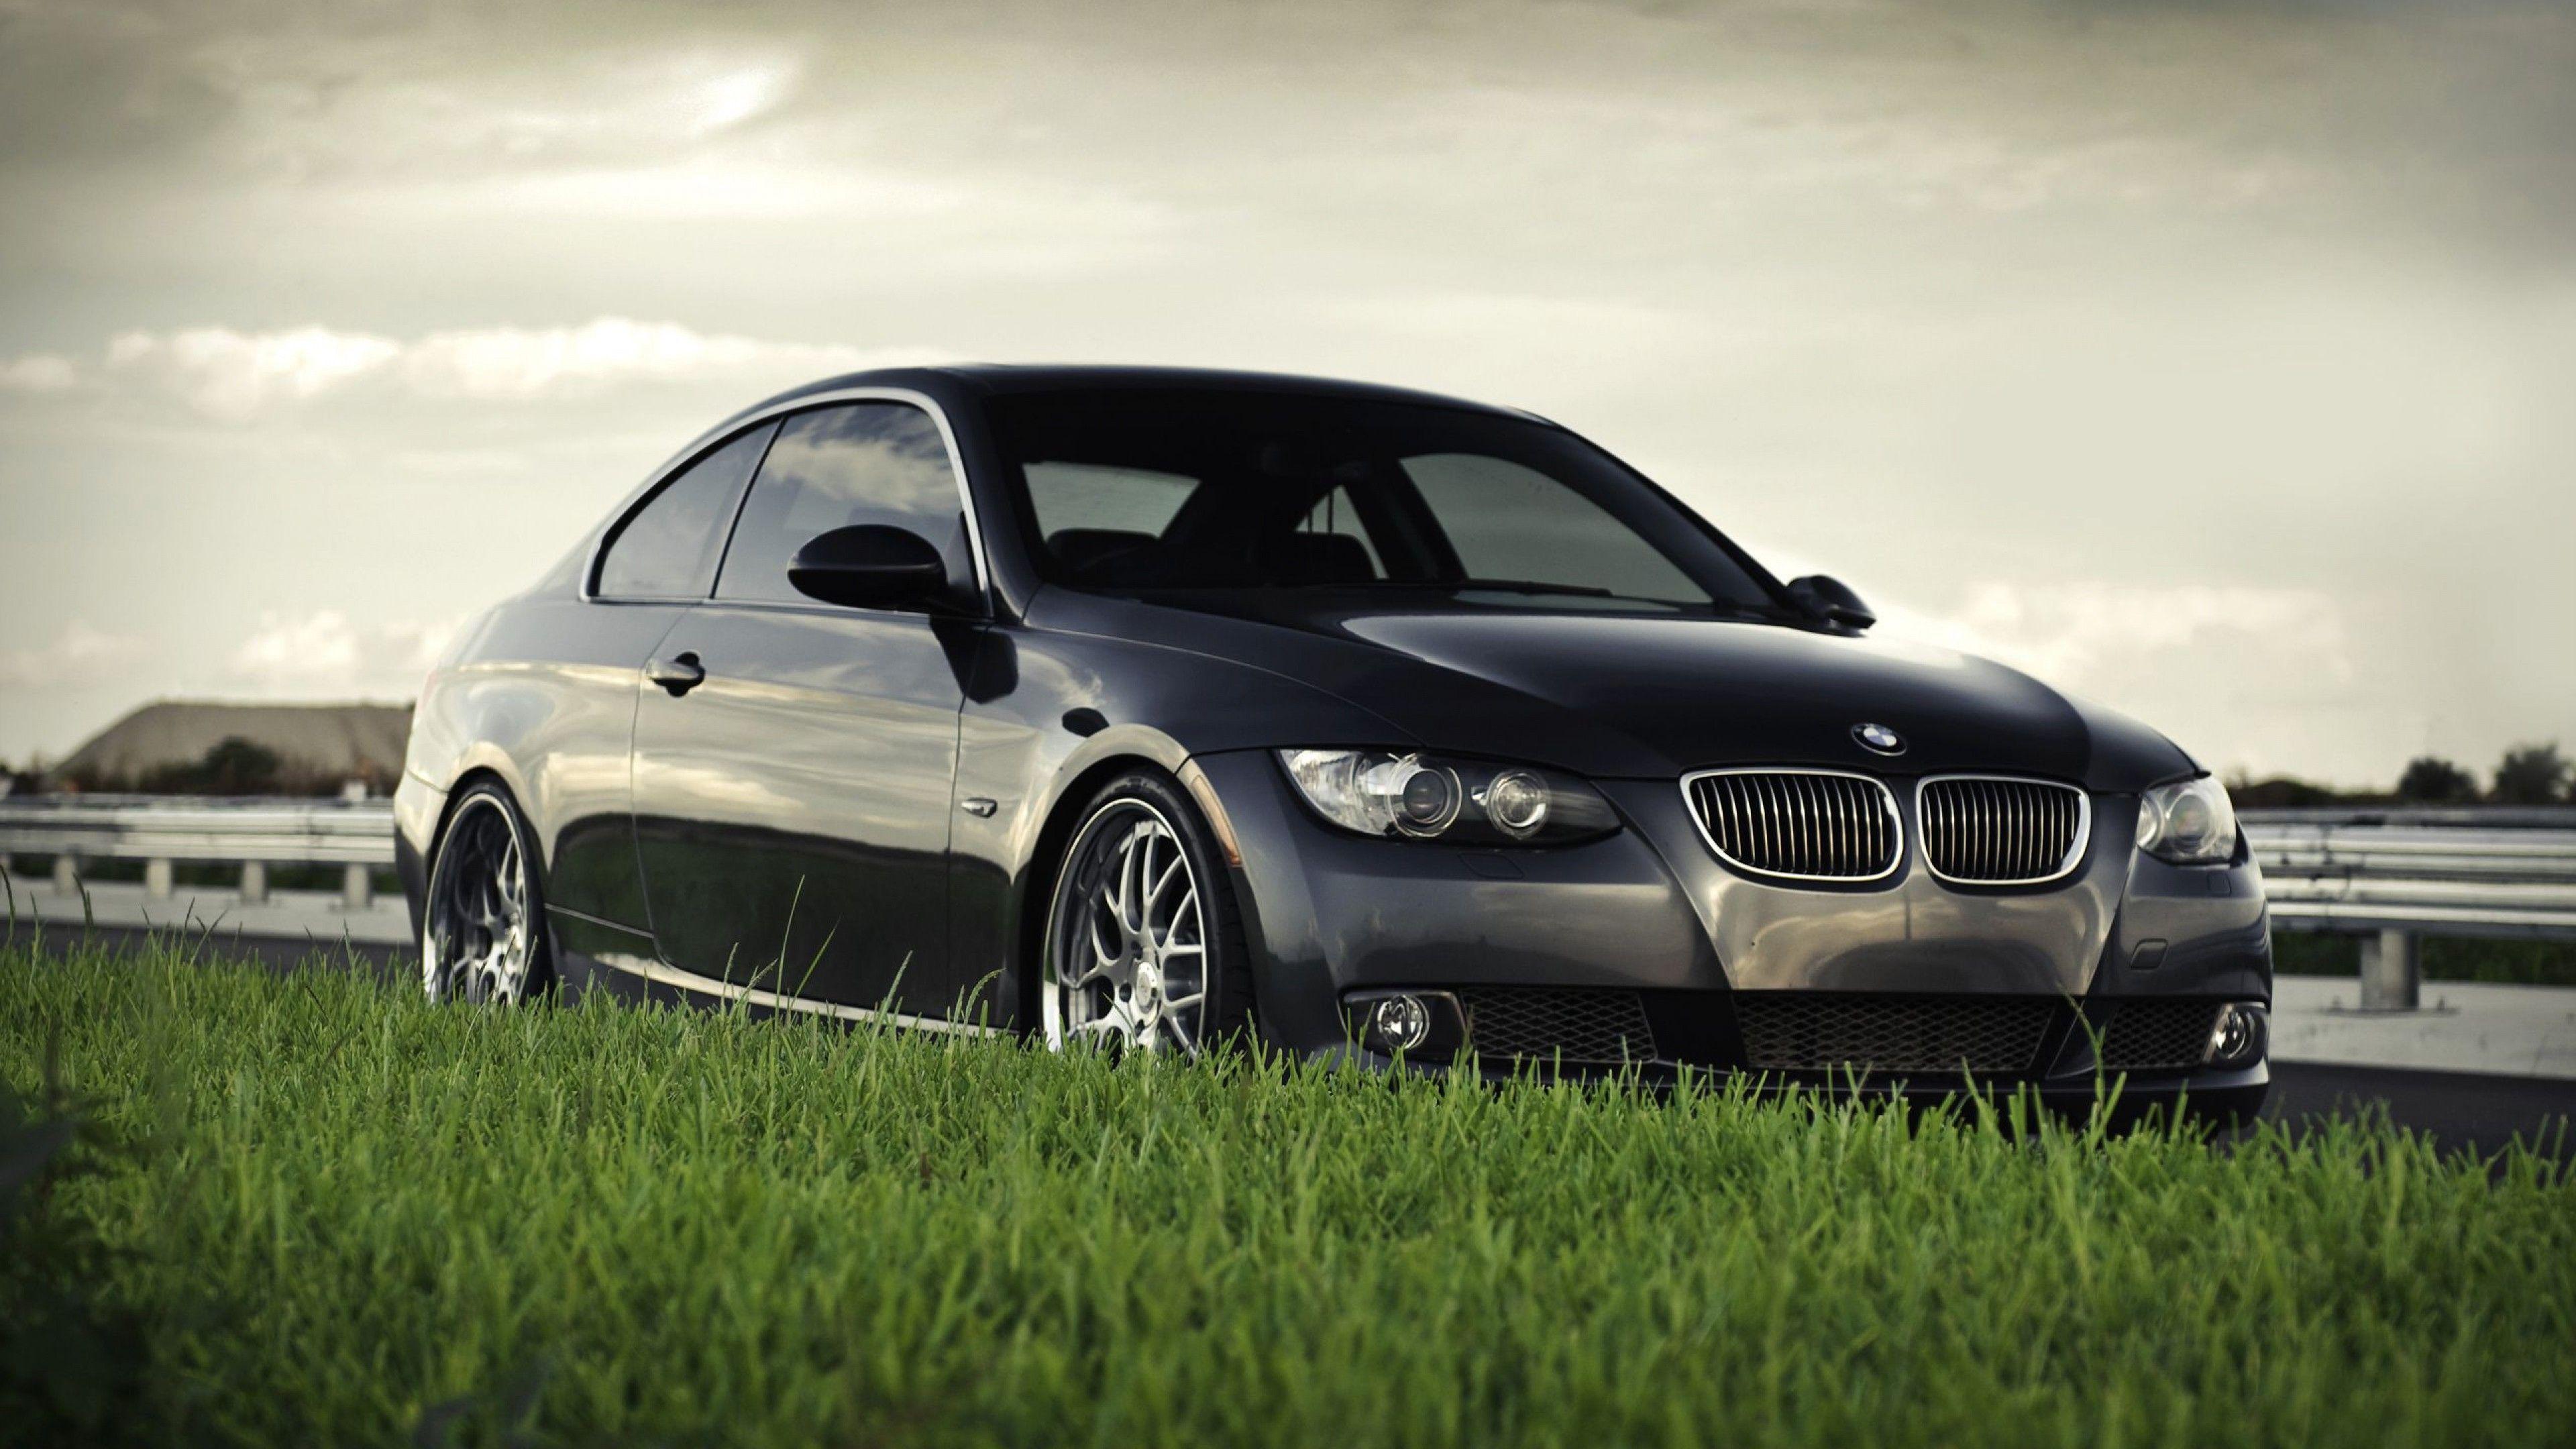 Bmw 3 Series Coupe, HD Cars, 4k Wallpaper, Image, Background